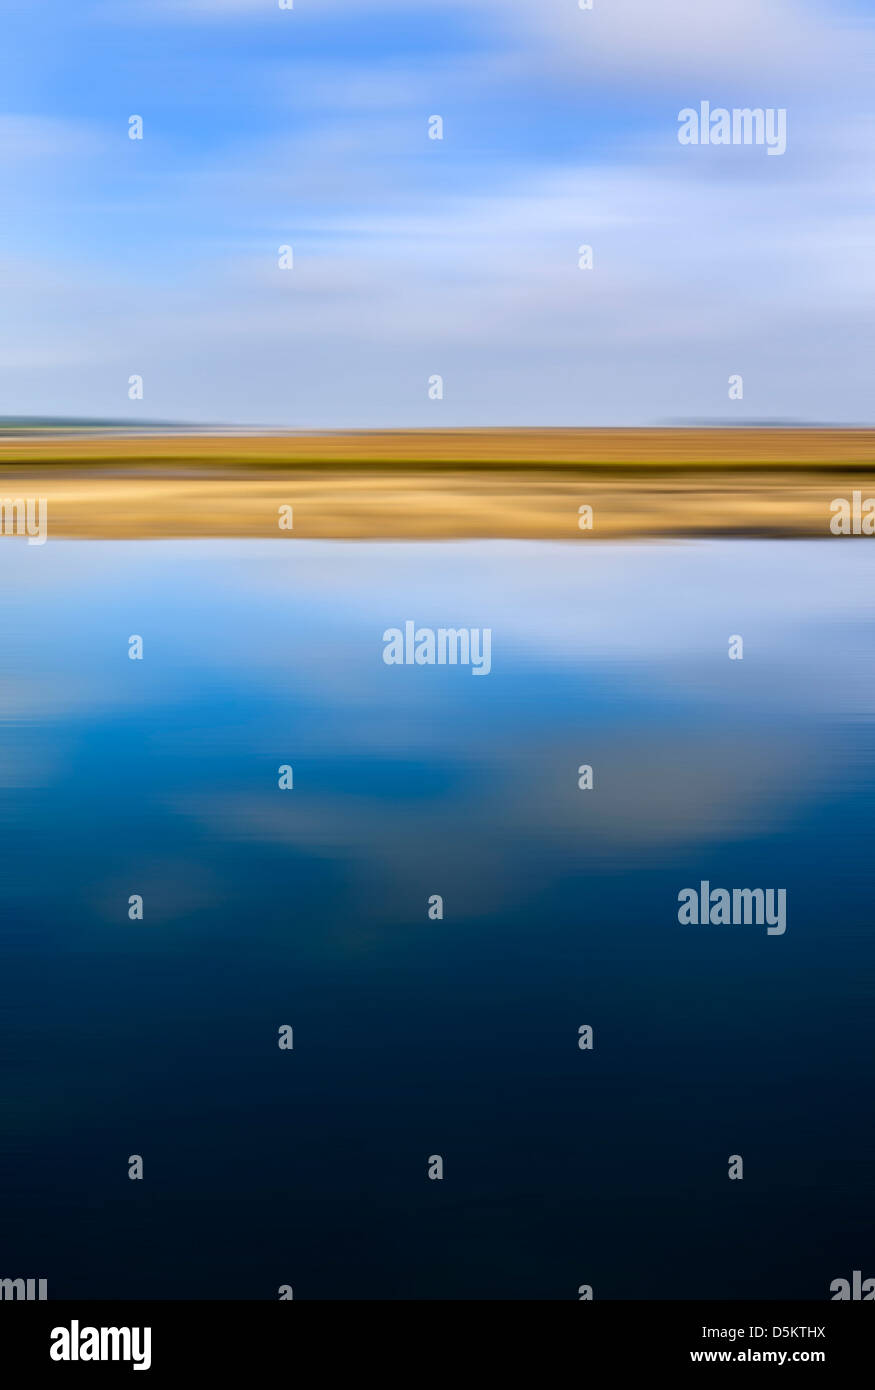 Blurred abstract image of saltmarshes on the North Norfolk coast. Stock Photo